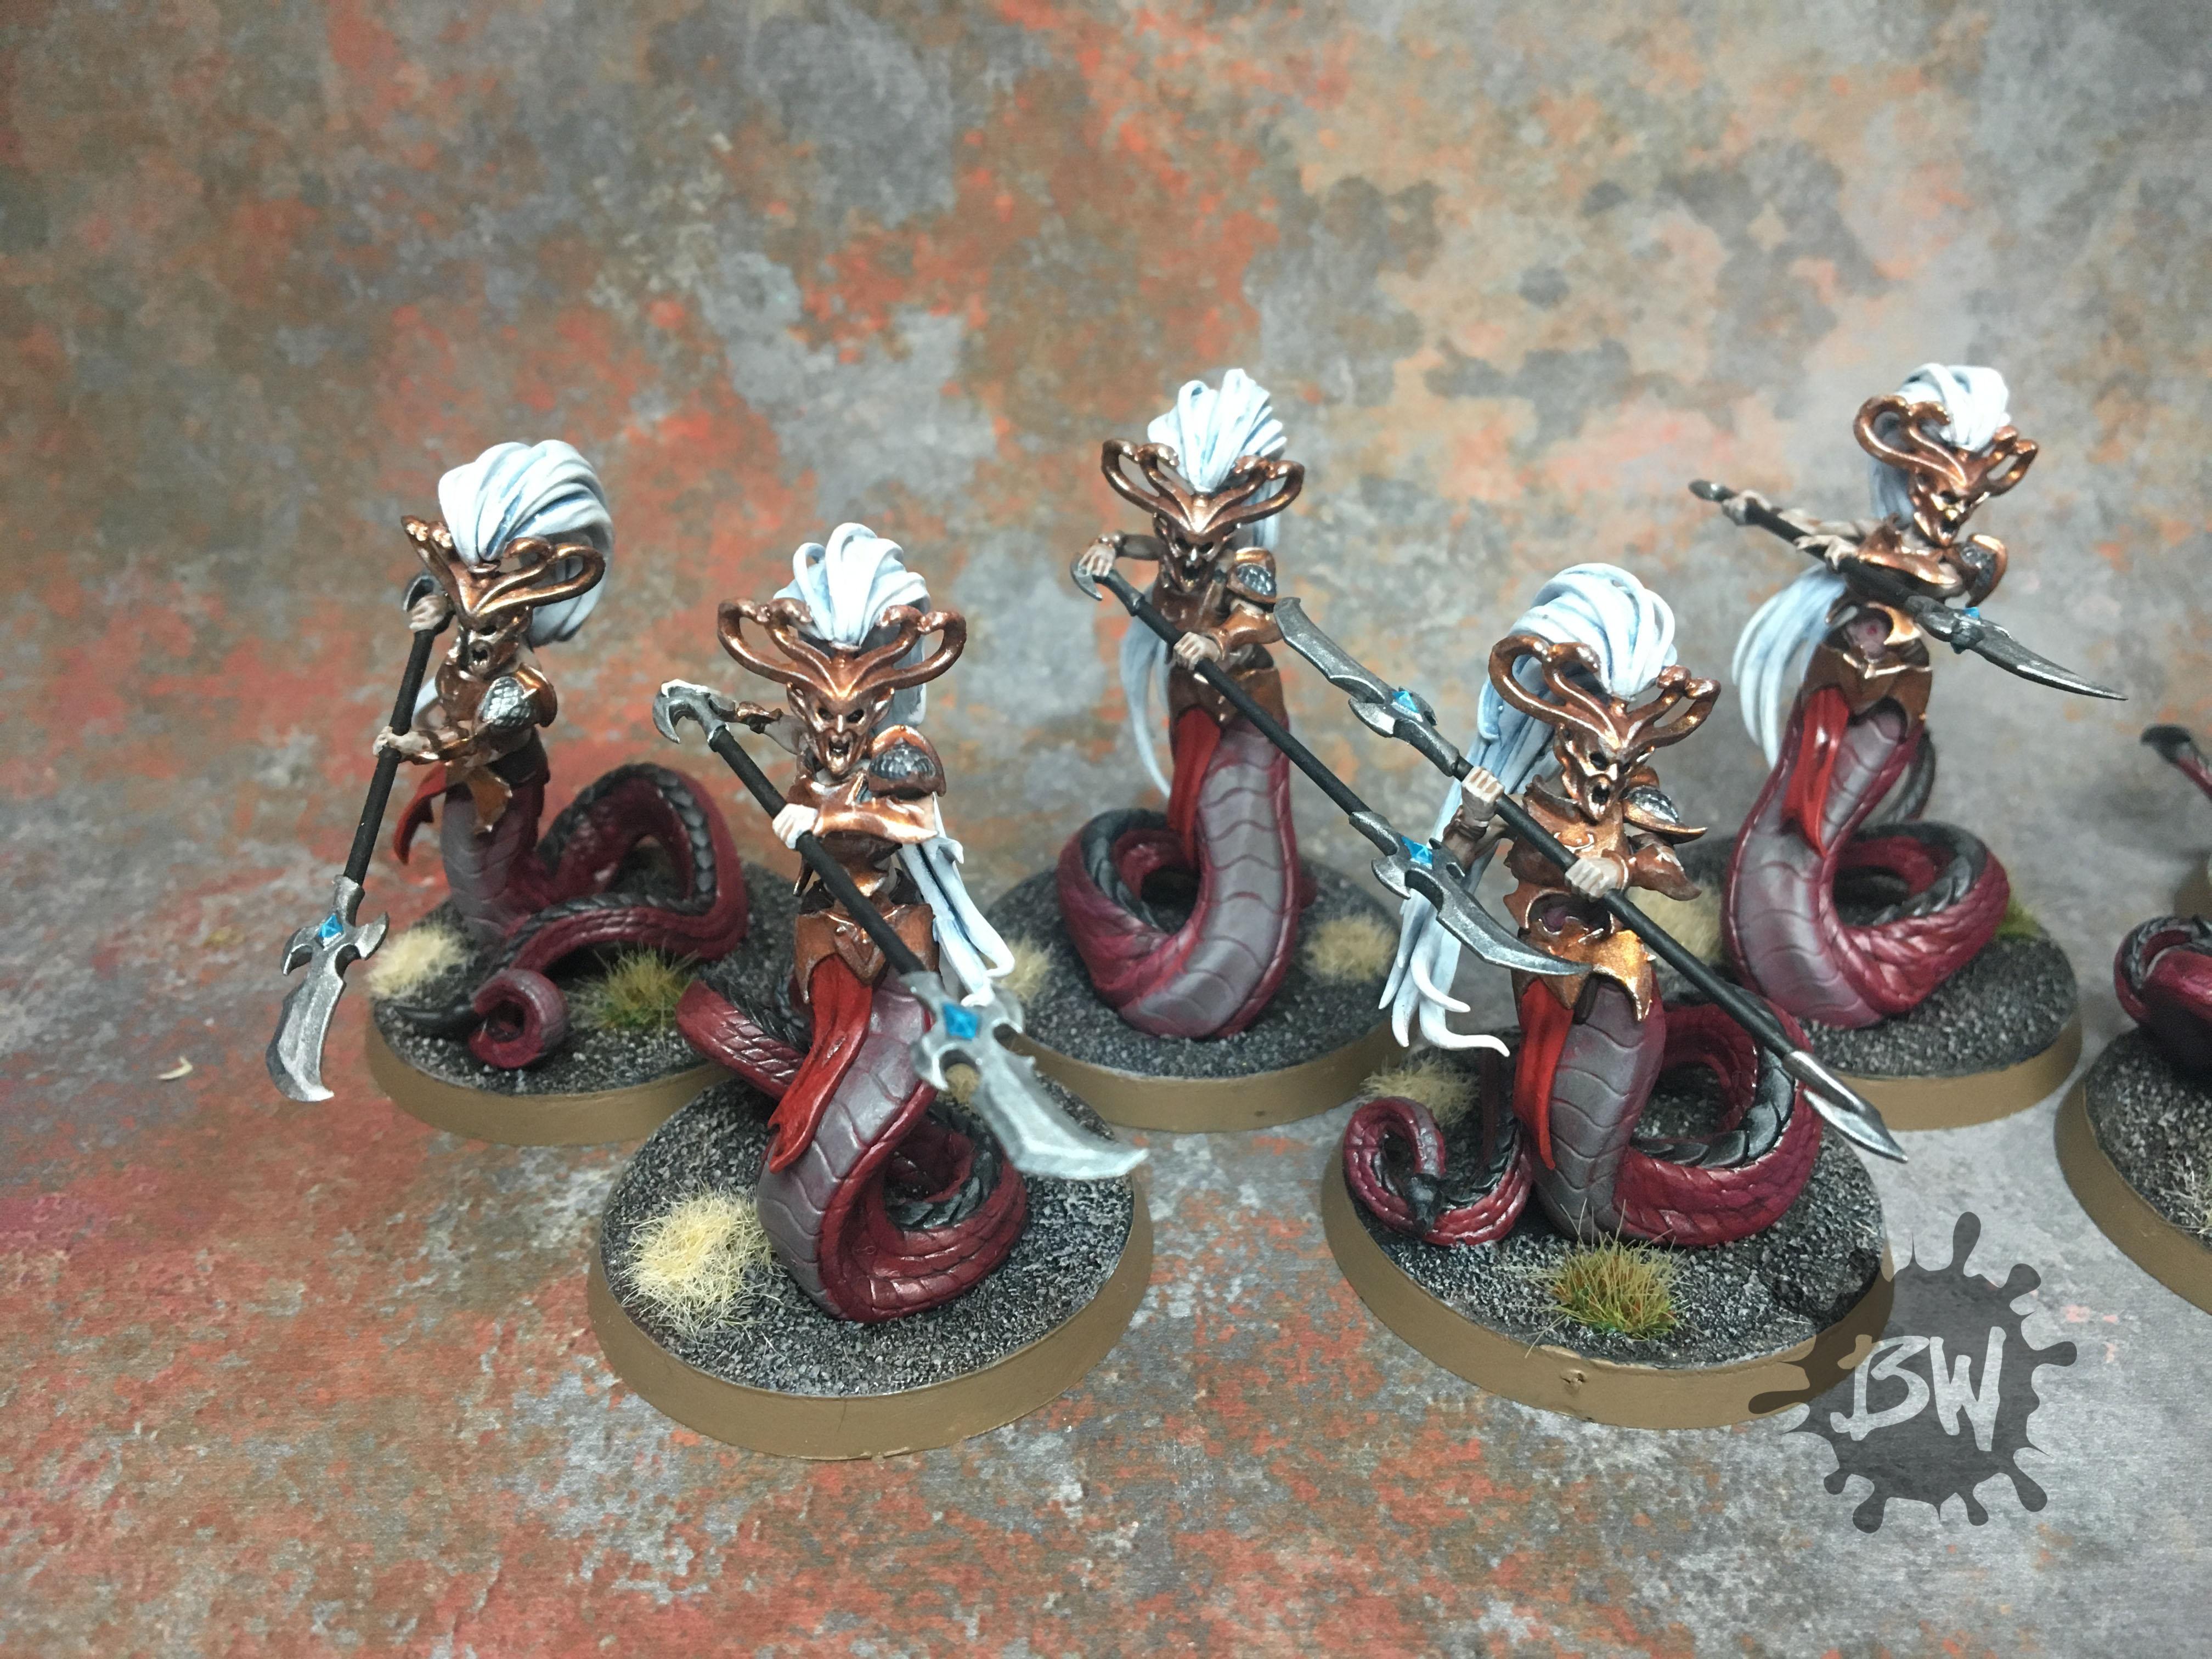 Age Of Sigmar, Bw, Commission, Daughters Of Khaine, Games Workshop, Melusai Blood Sisters, Order, Painting, Warhammer Fantasy